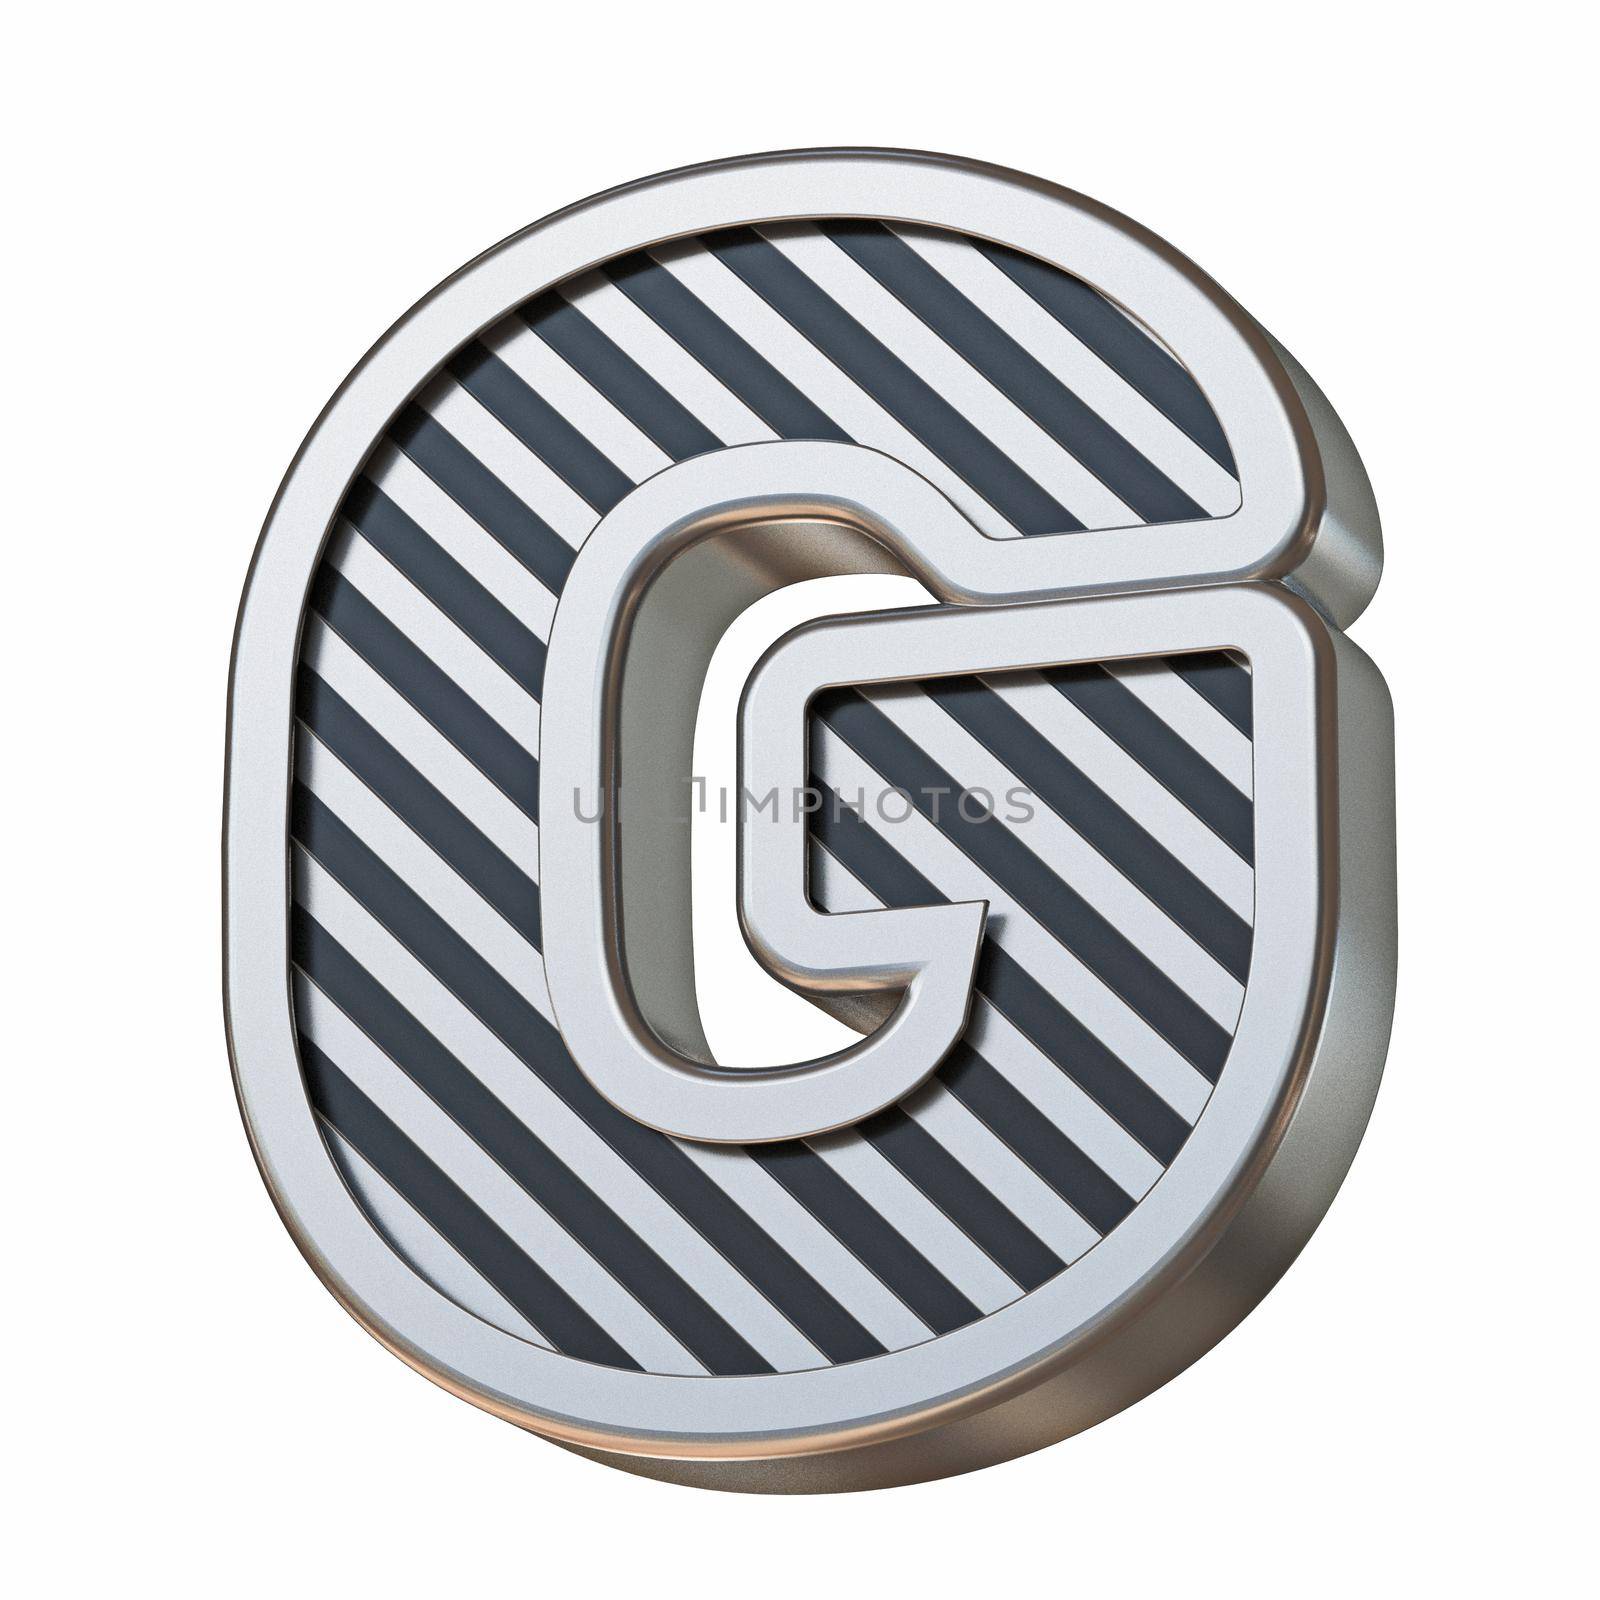 Stainless steel and black stripes font Letter G 3D by djmilic